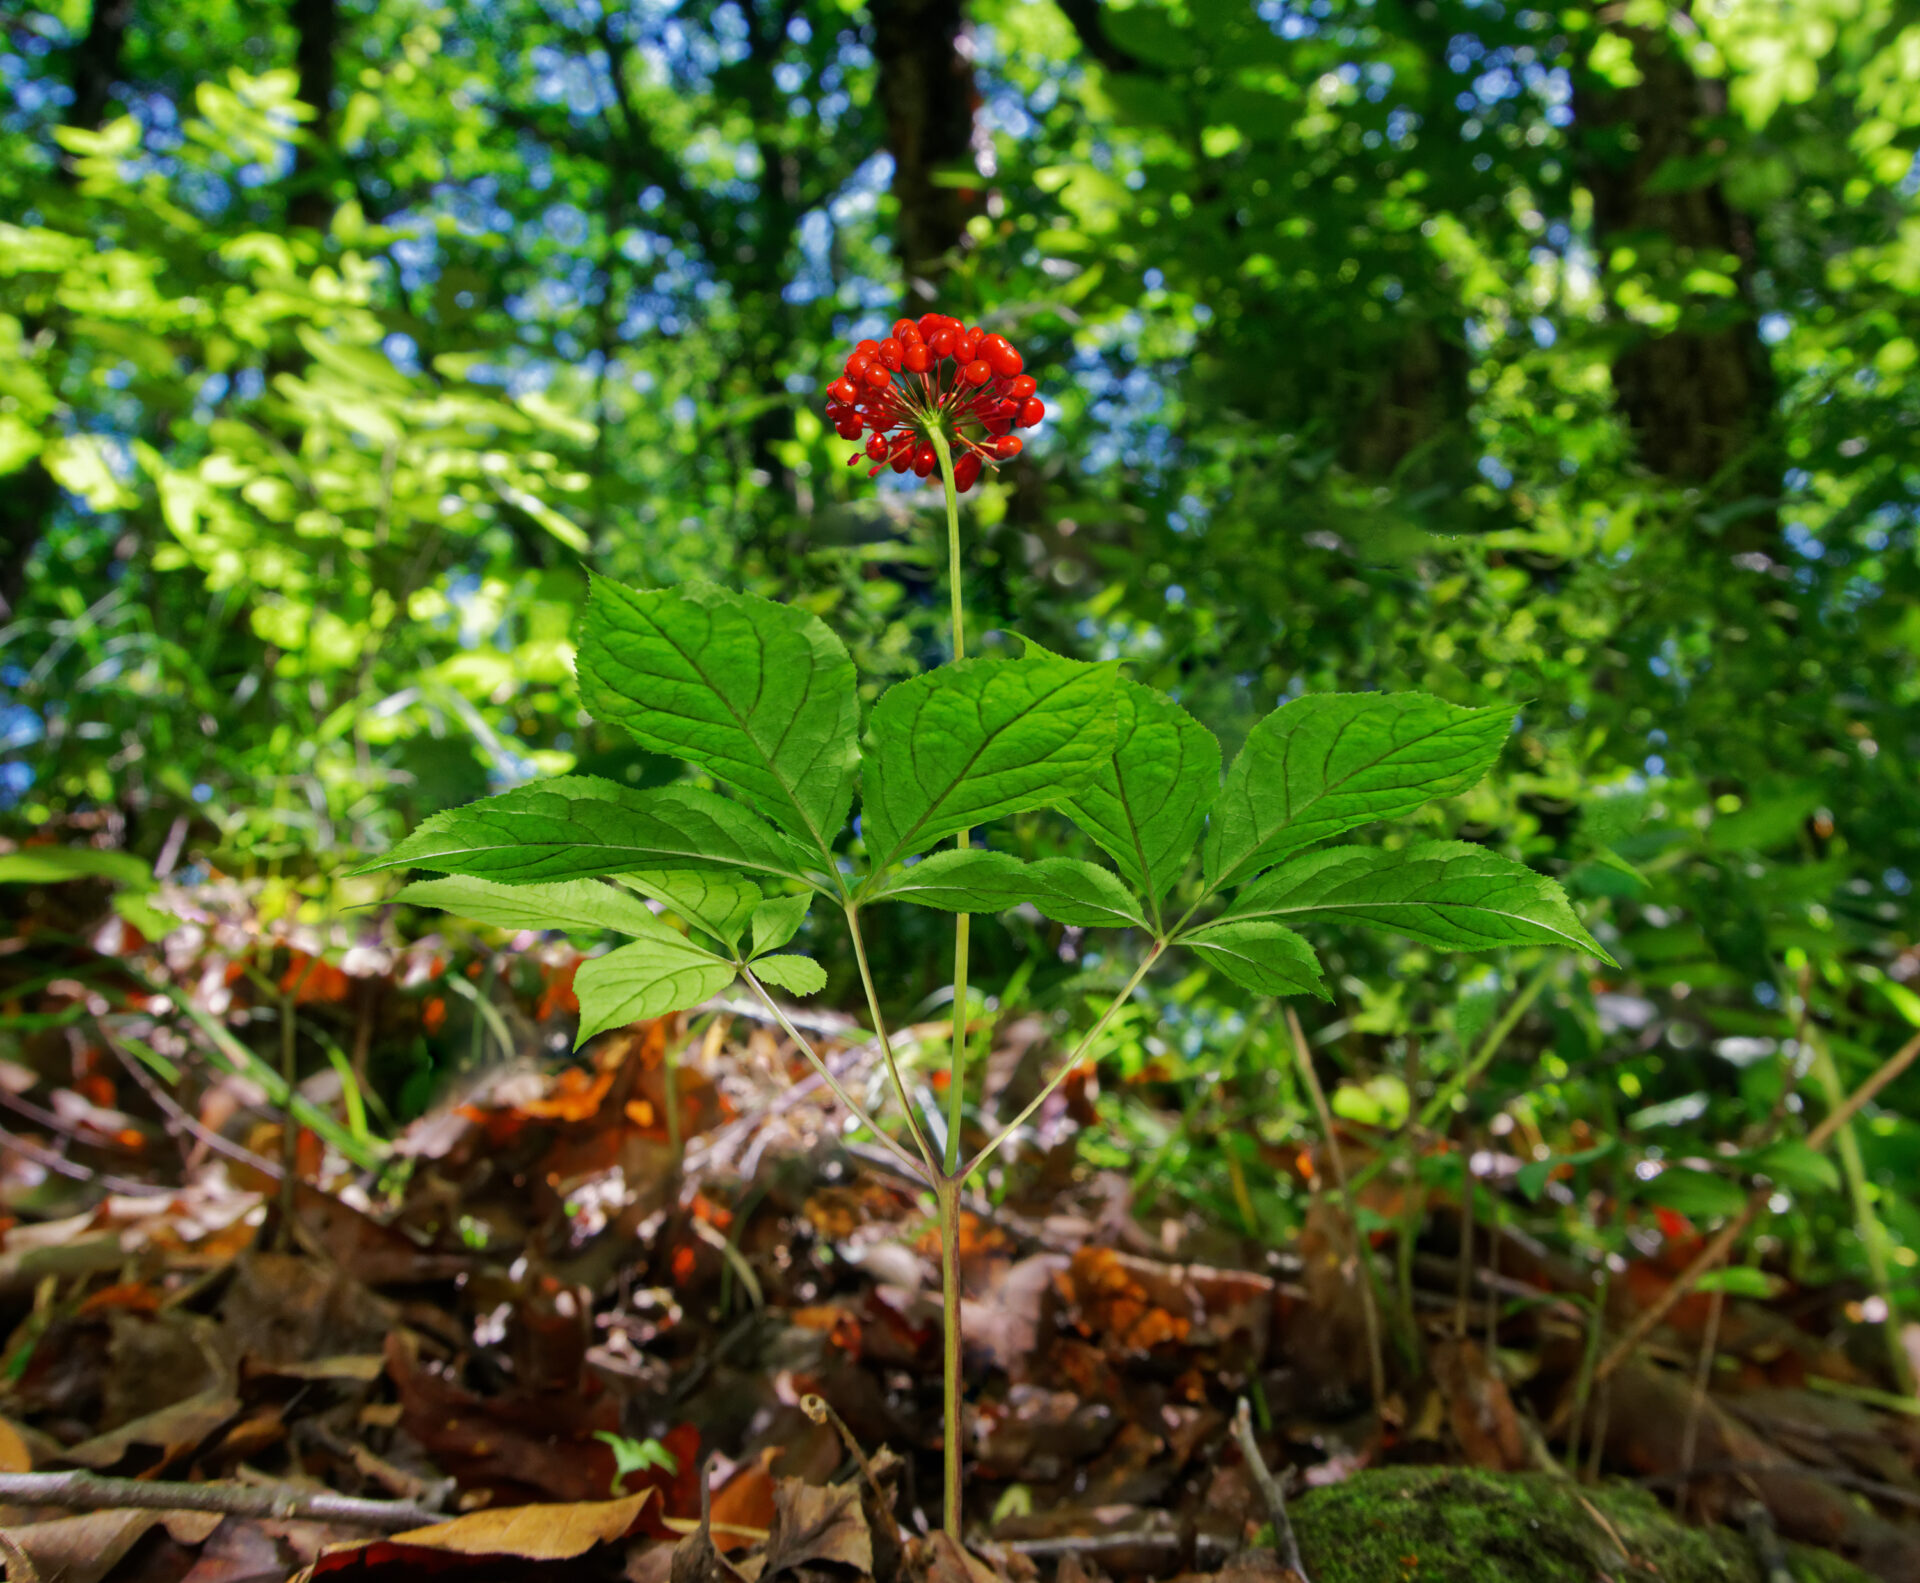 Permits Soon Available For Harvesting Ginseng In National Forest